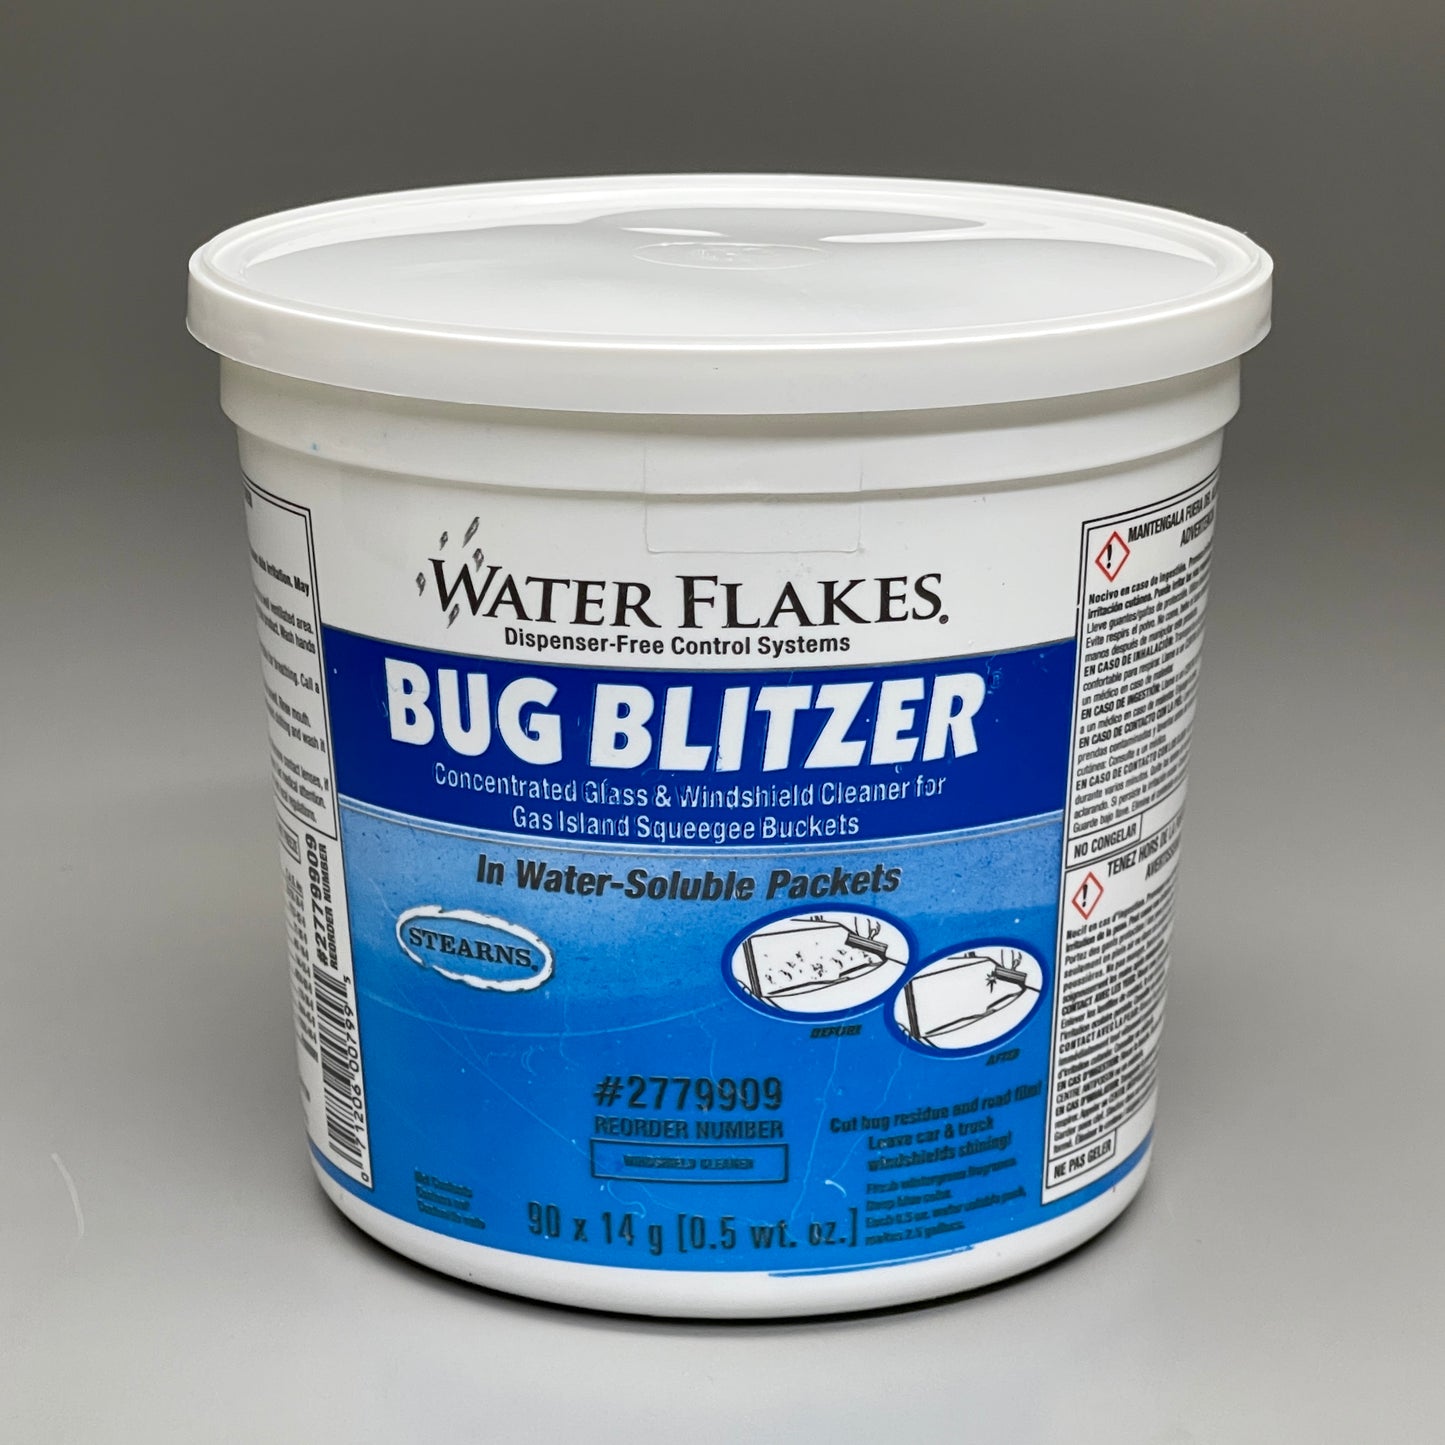 WATER FLAKES Stearns Bug Blitzer in Premeasured Packets 90 x 0.5 oz. Packets (New)